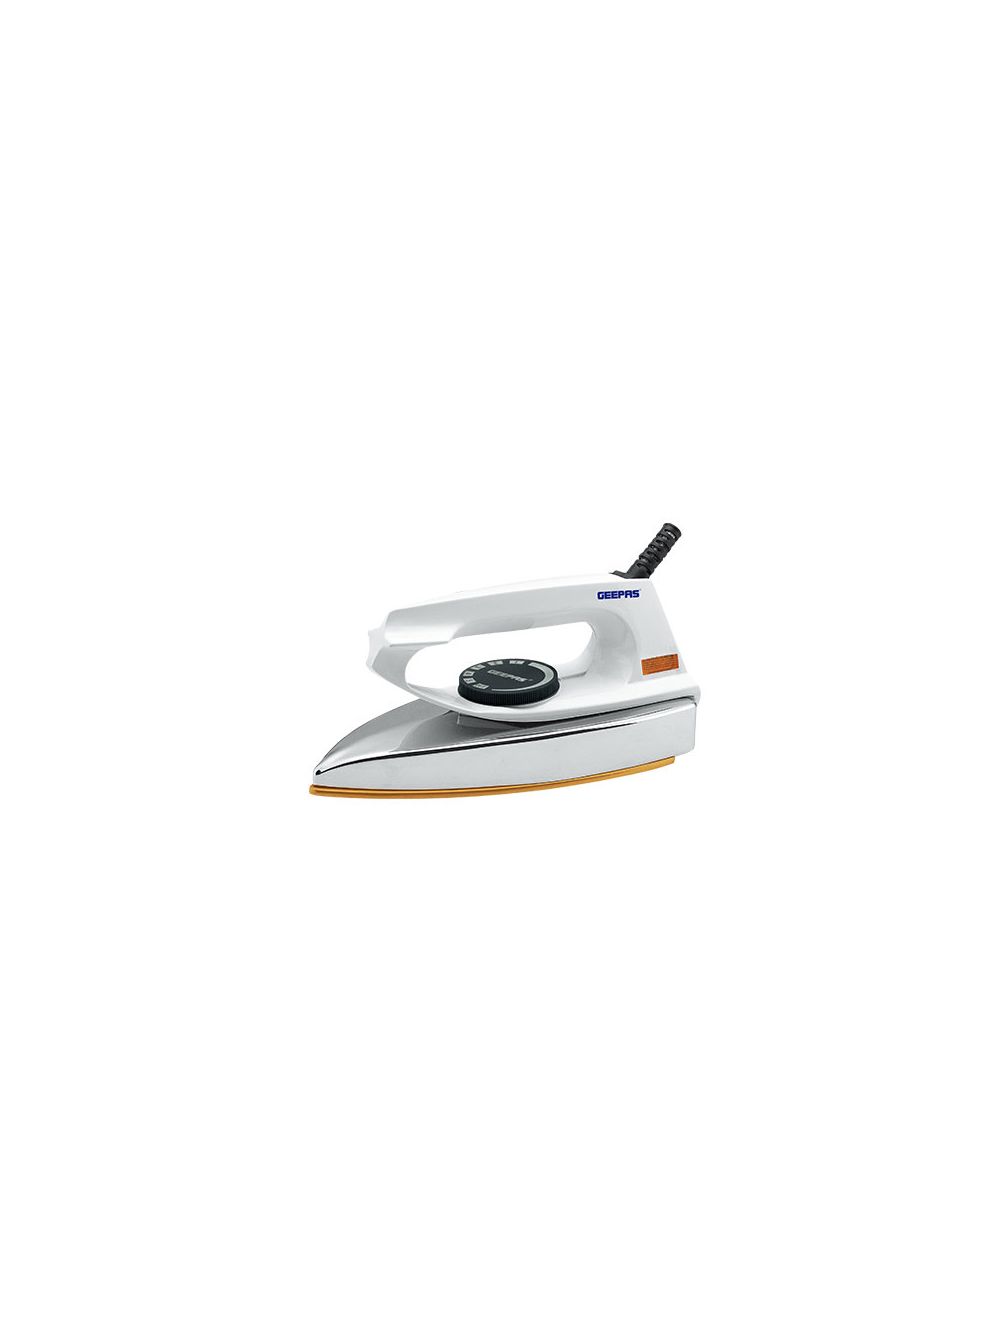 Geepas Automatic Dry Iron 1200W | reliable performance | lightweight | variable steam settings | safety features | stylish | even heat distribution | Halabh.com